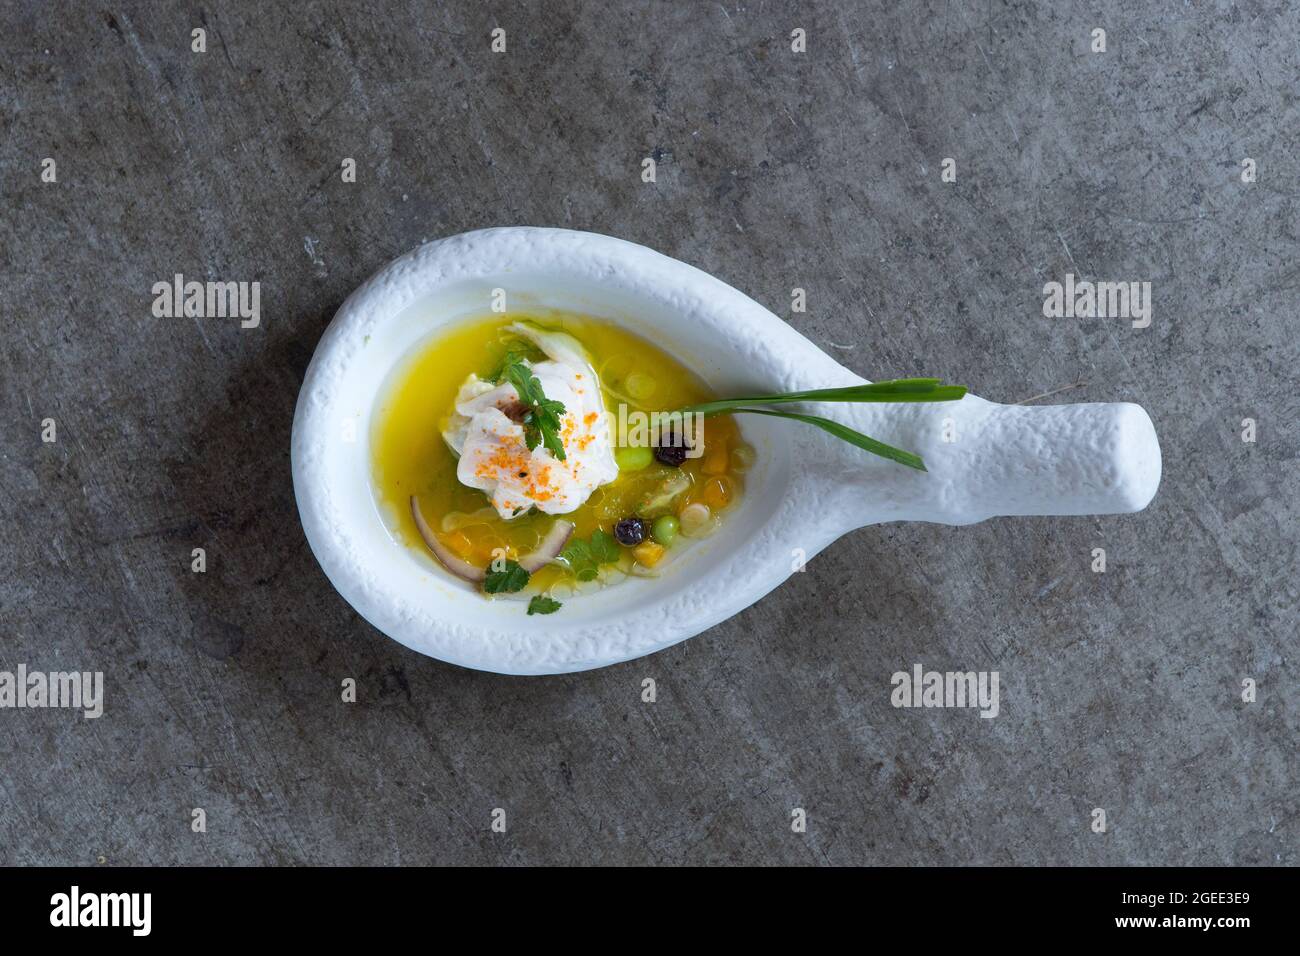 Dish above view, mediterranean food fusion creative plate. Spain food. Stock Photo